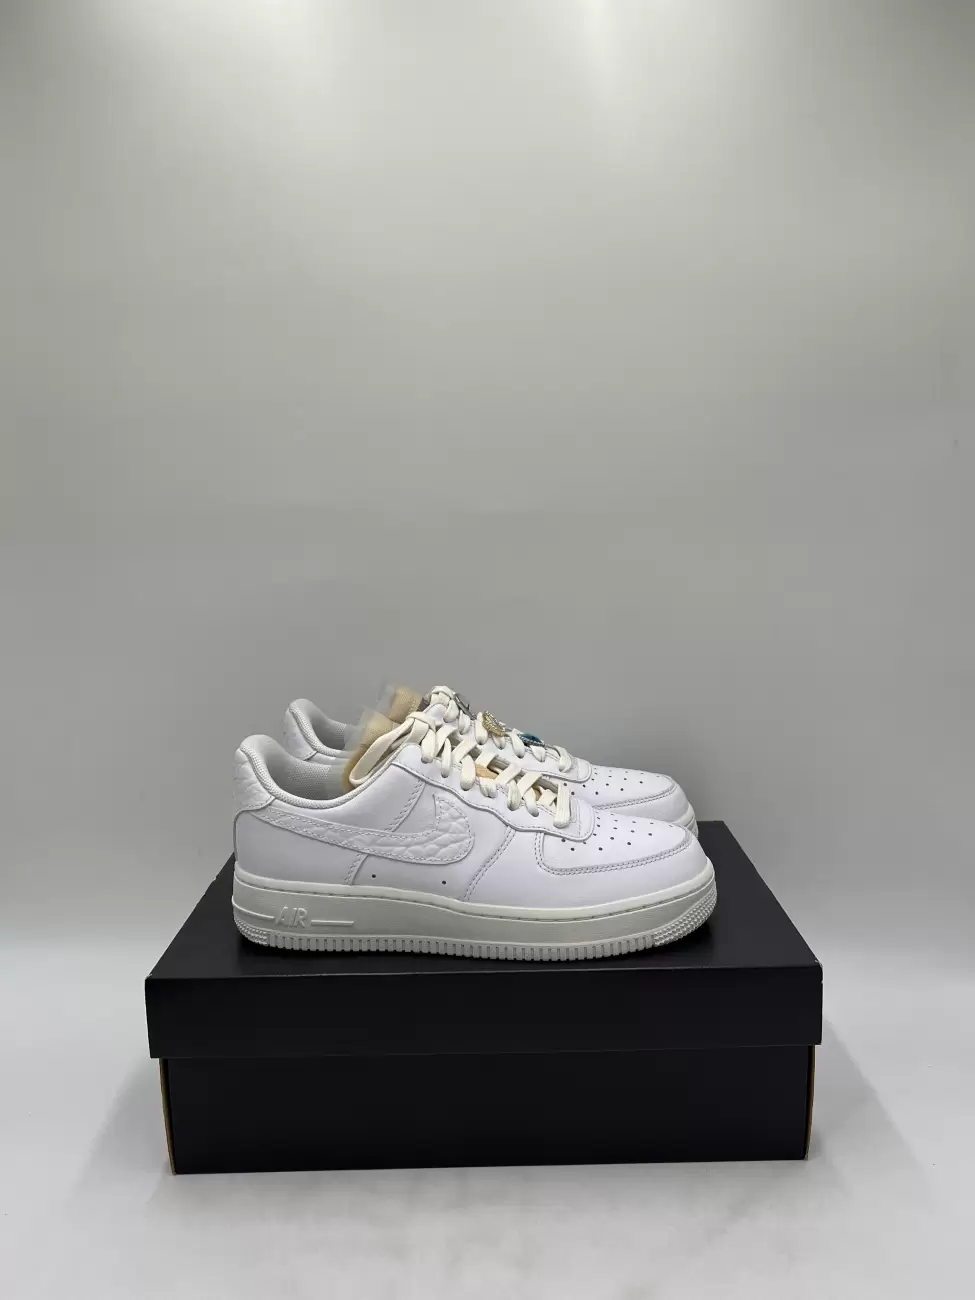 Nike Wmns Air Force 1 Low '07 LX 'Bling